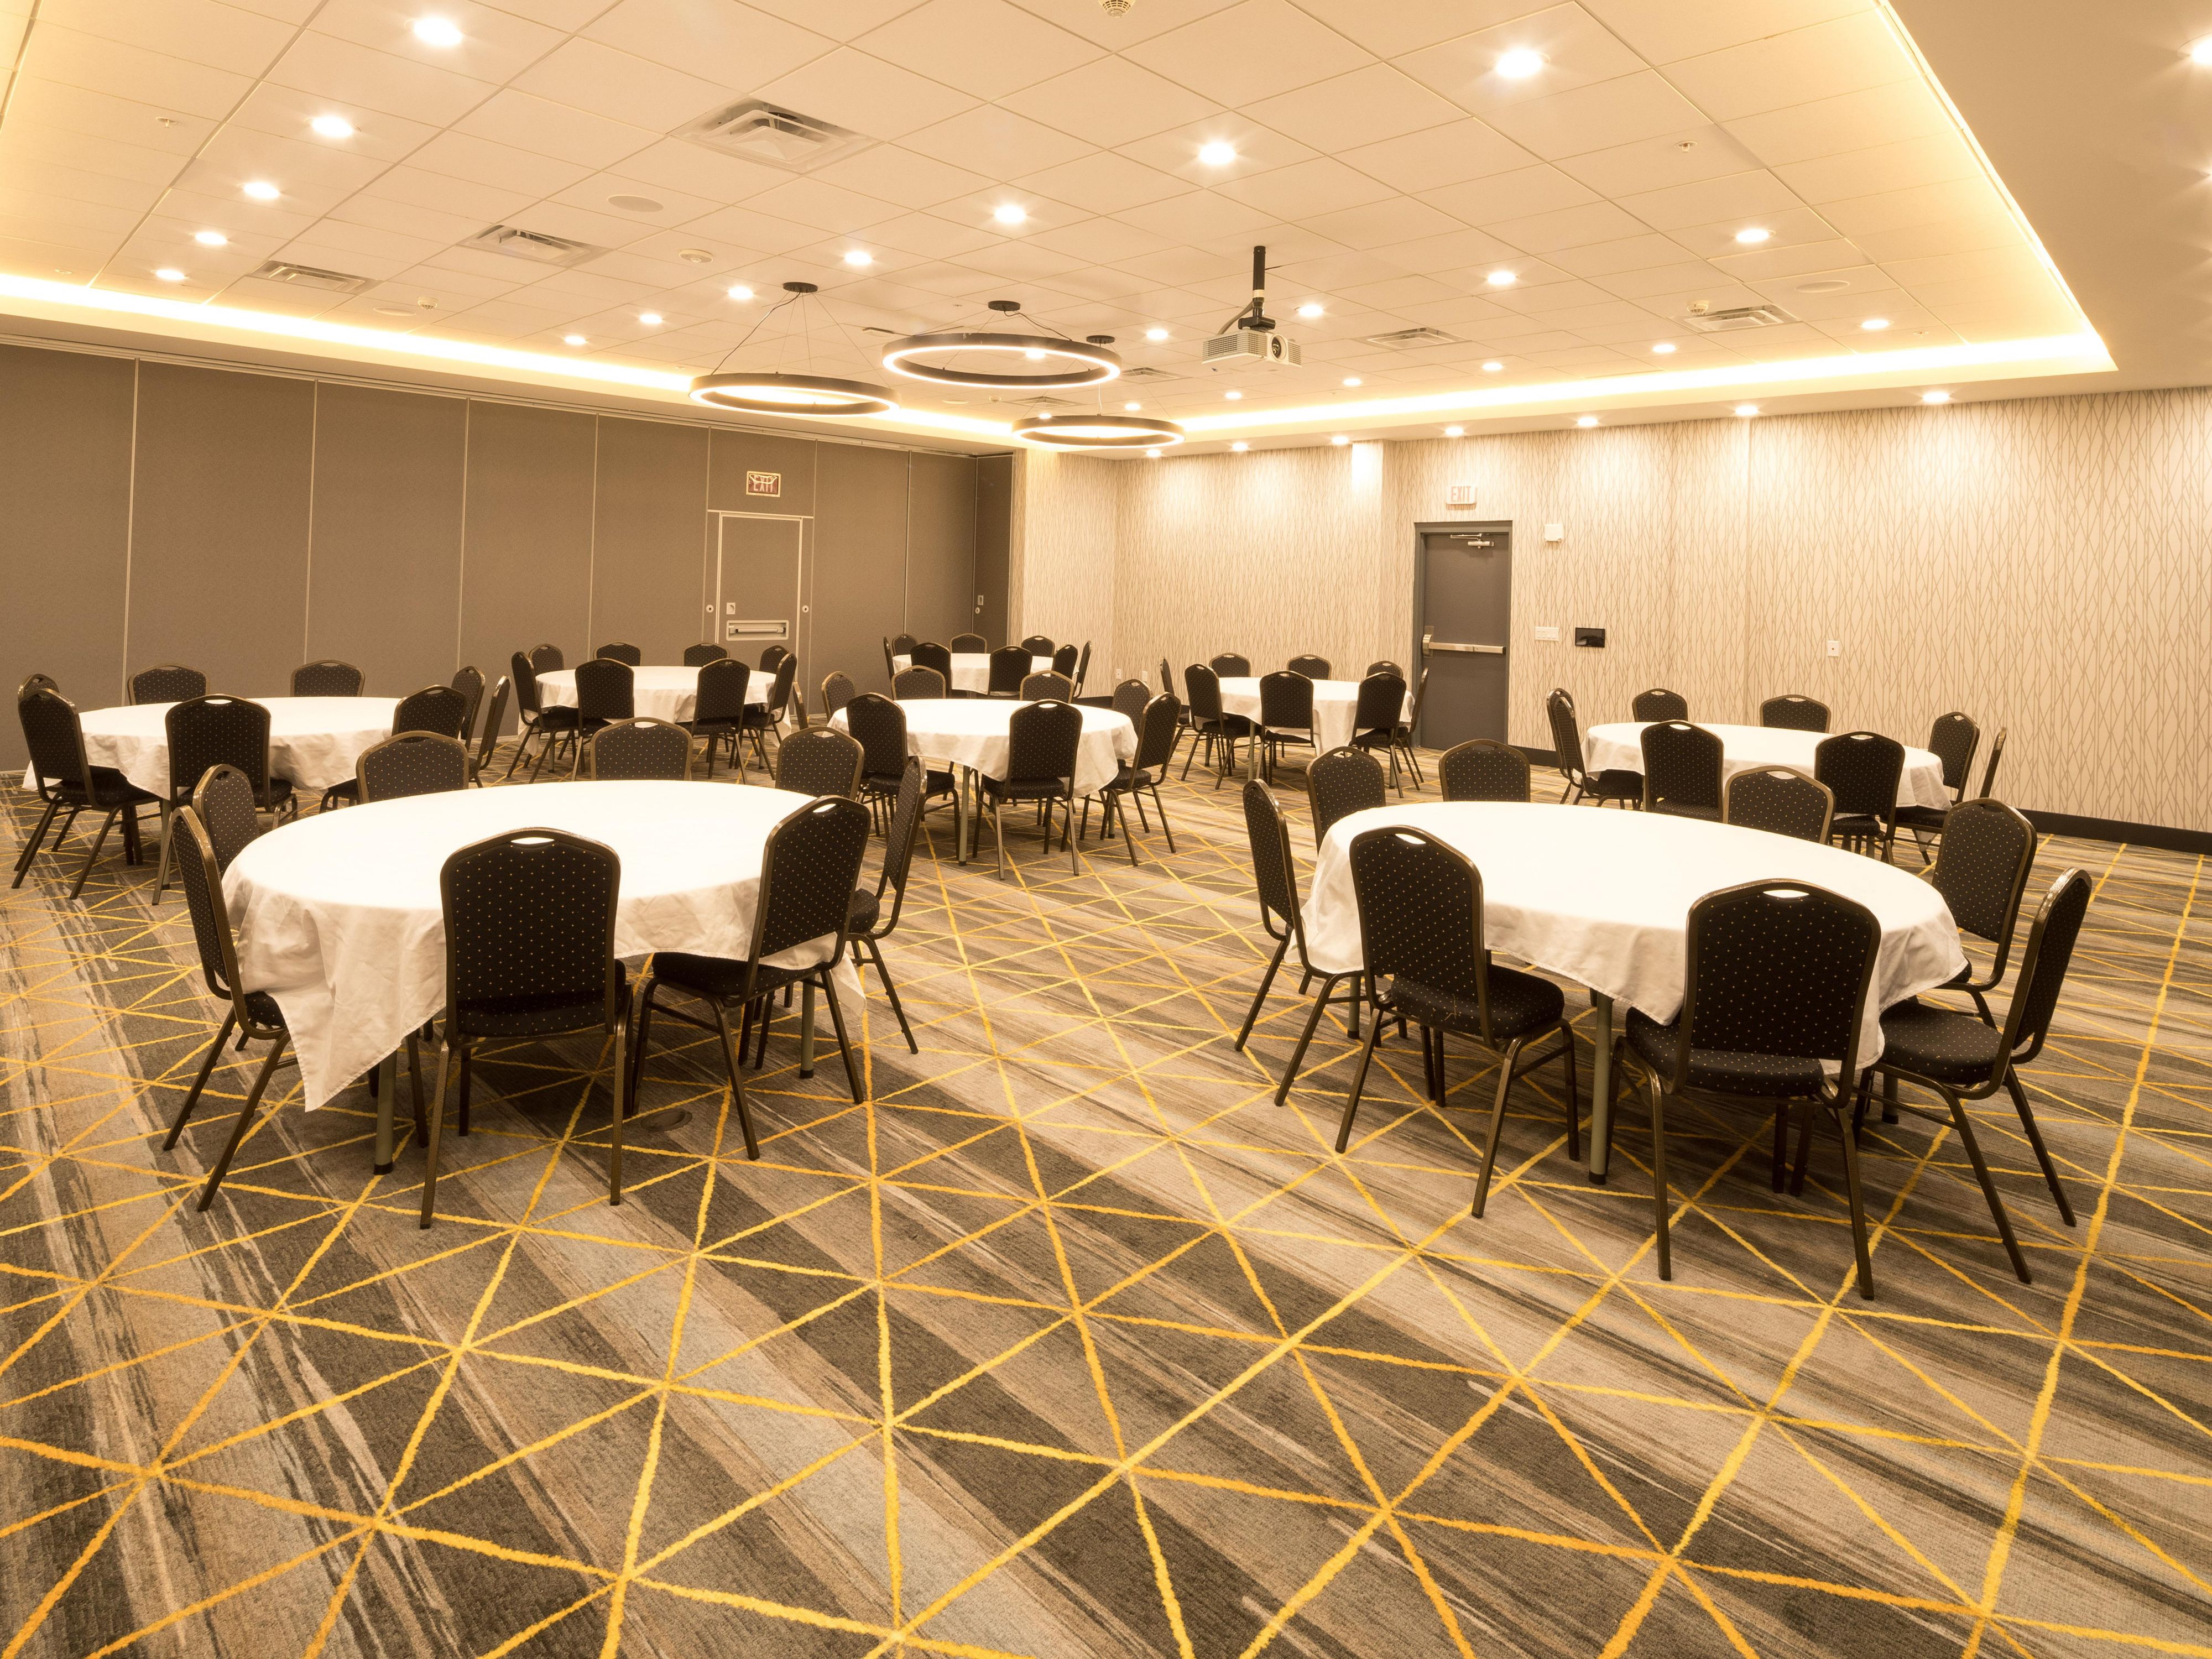 Host your next business meeting, conference, training, or social gathering in our stylish event spaces near Detroit. With four flexible meeting venues, the latest audiovisual equipment, catering, and a support team, you'll have everything you need for a successful event in Troy, Michigan.